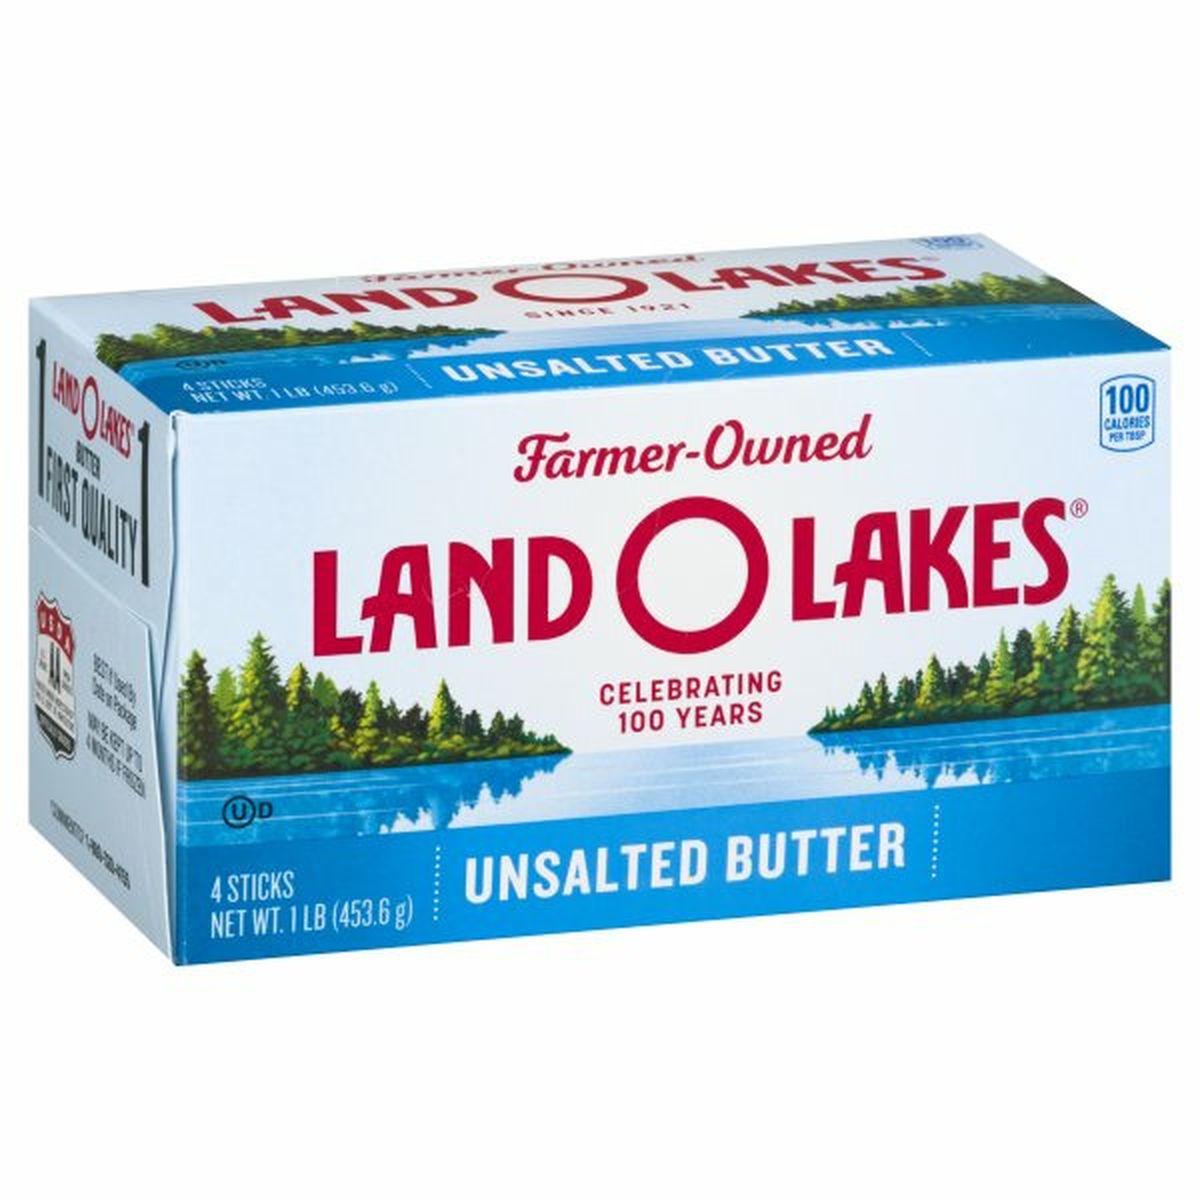 Calories in Land O Lakes Butter, Unsalted